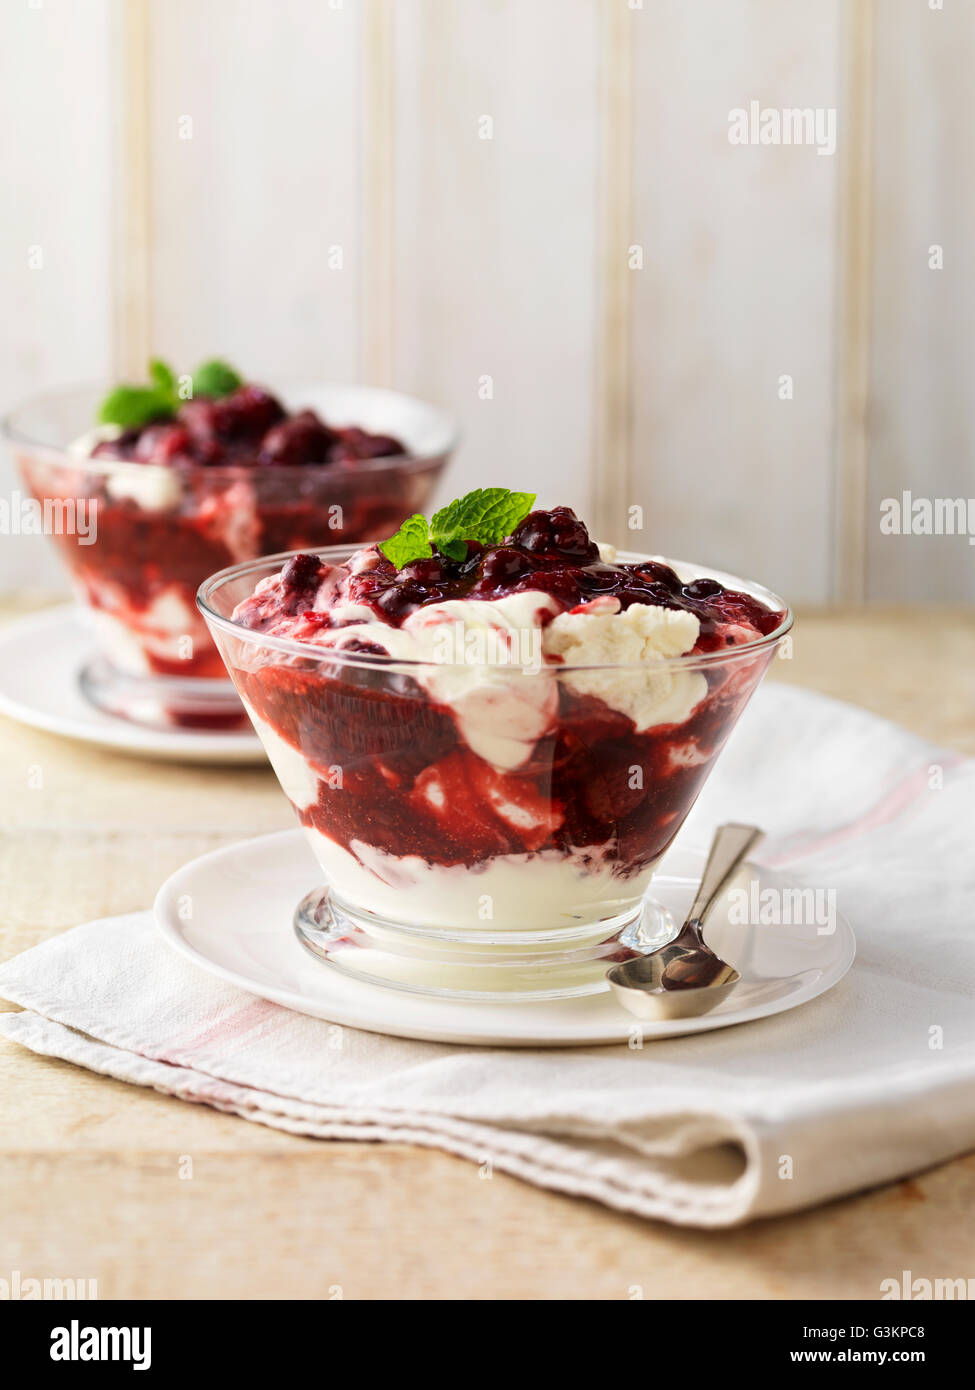 Summer fruit compote dessert in glass dish Stock Photo